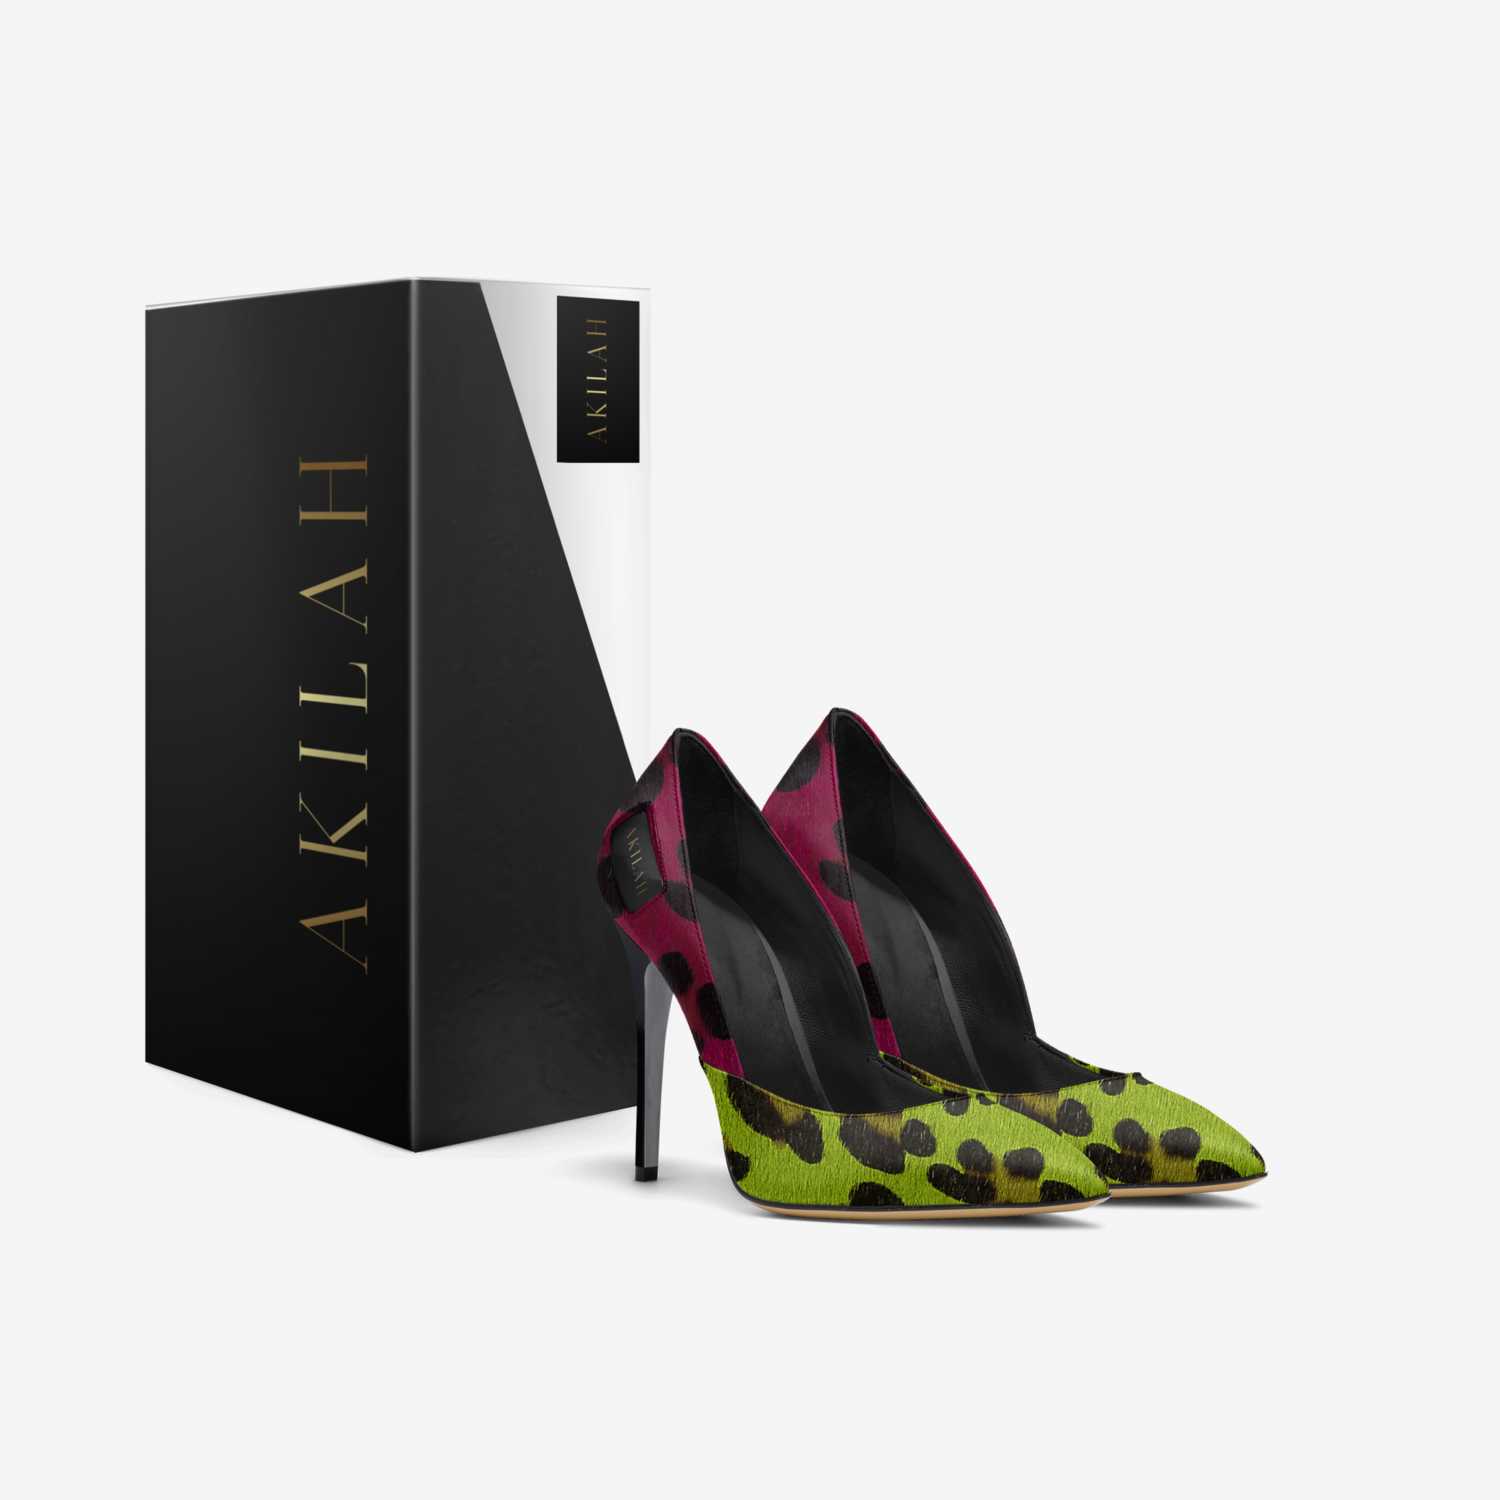 A K I L A H custom made in Italy shoes by Keyanna Carra | Box view